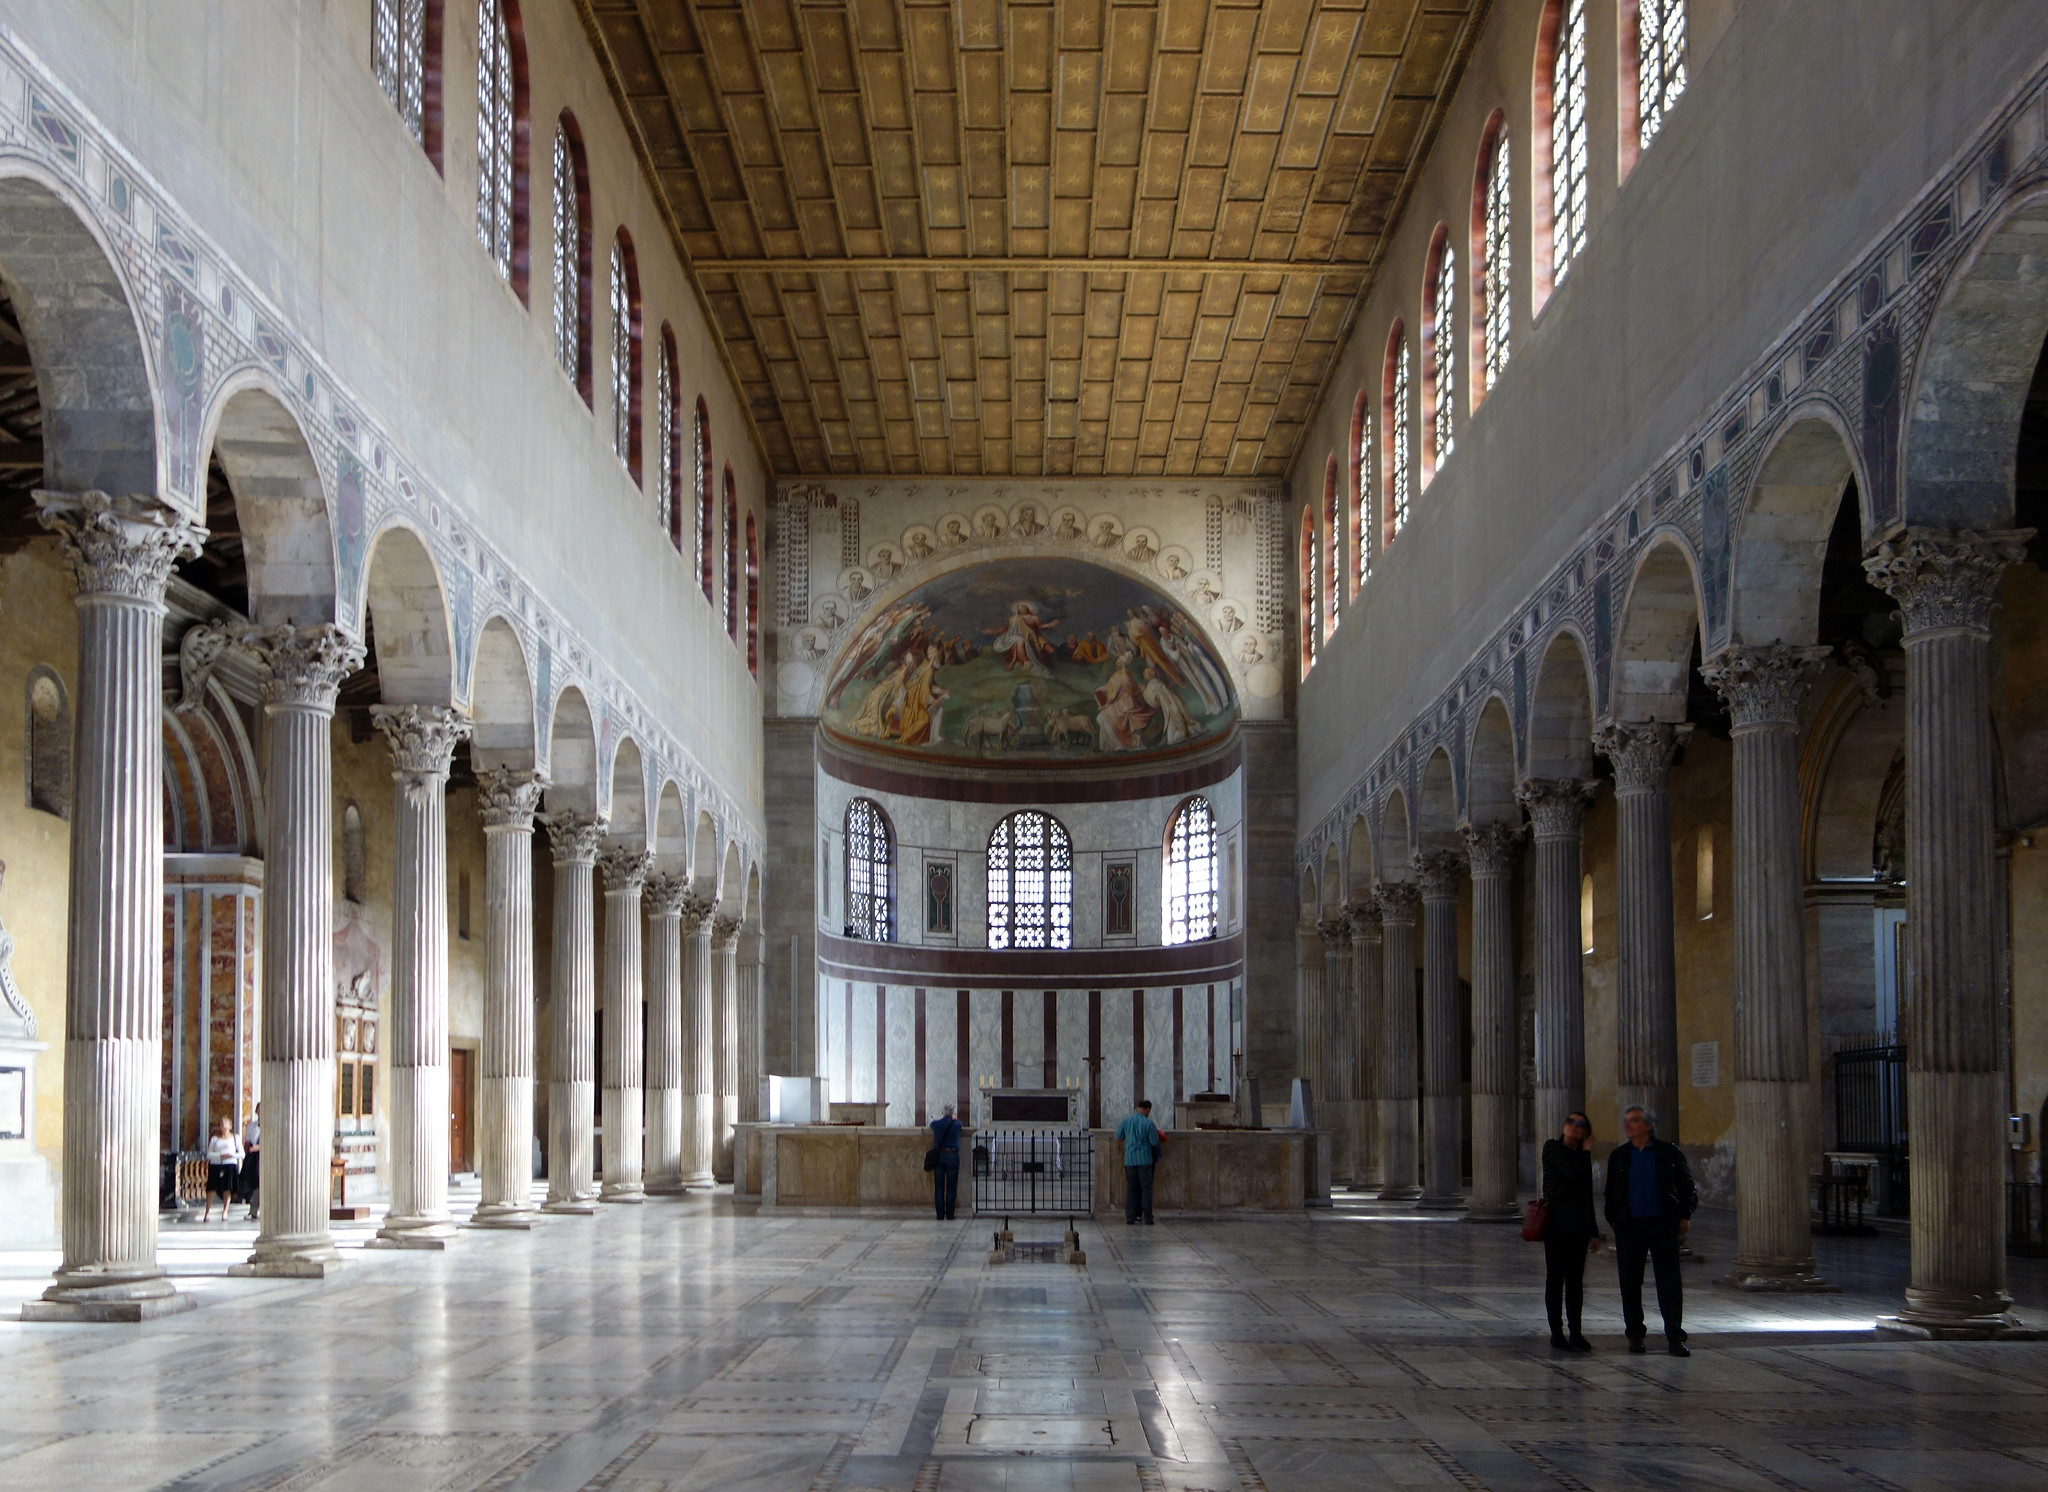 View down the nave towards the apse—the row of windows above the nave arcade is called the clerestory and we see an aisle on either side of the nave. Basilica of Santa Sabina, c. 432 C.E., Rome (photo: Steven Zucker, CC BY-NC-SA 2.0)